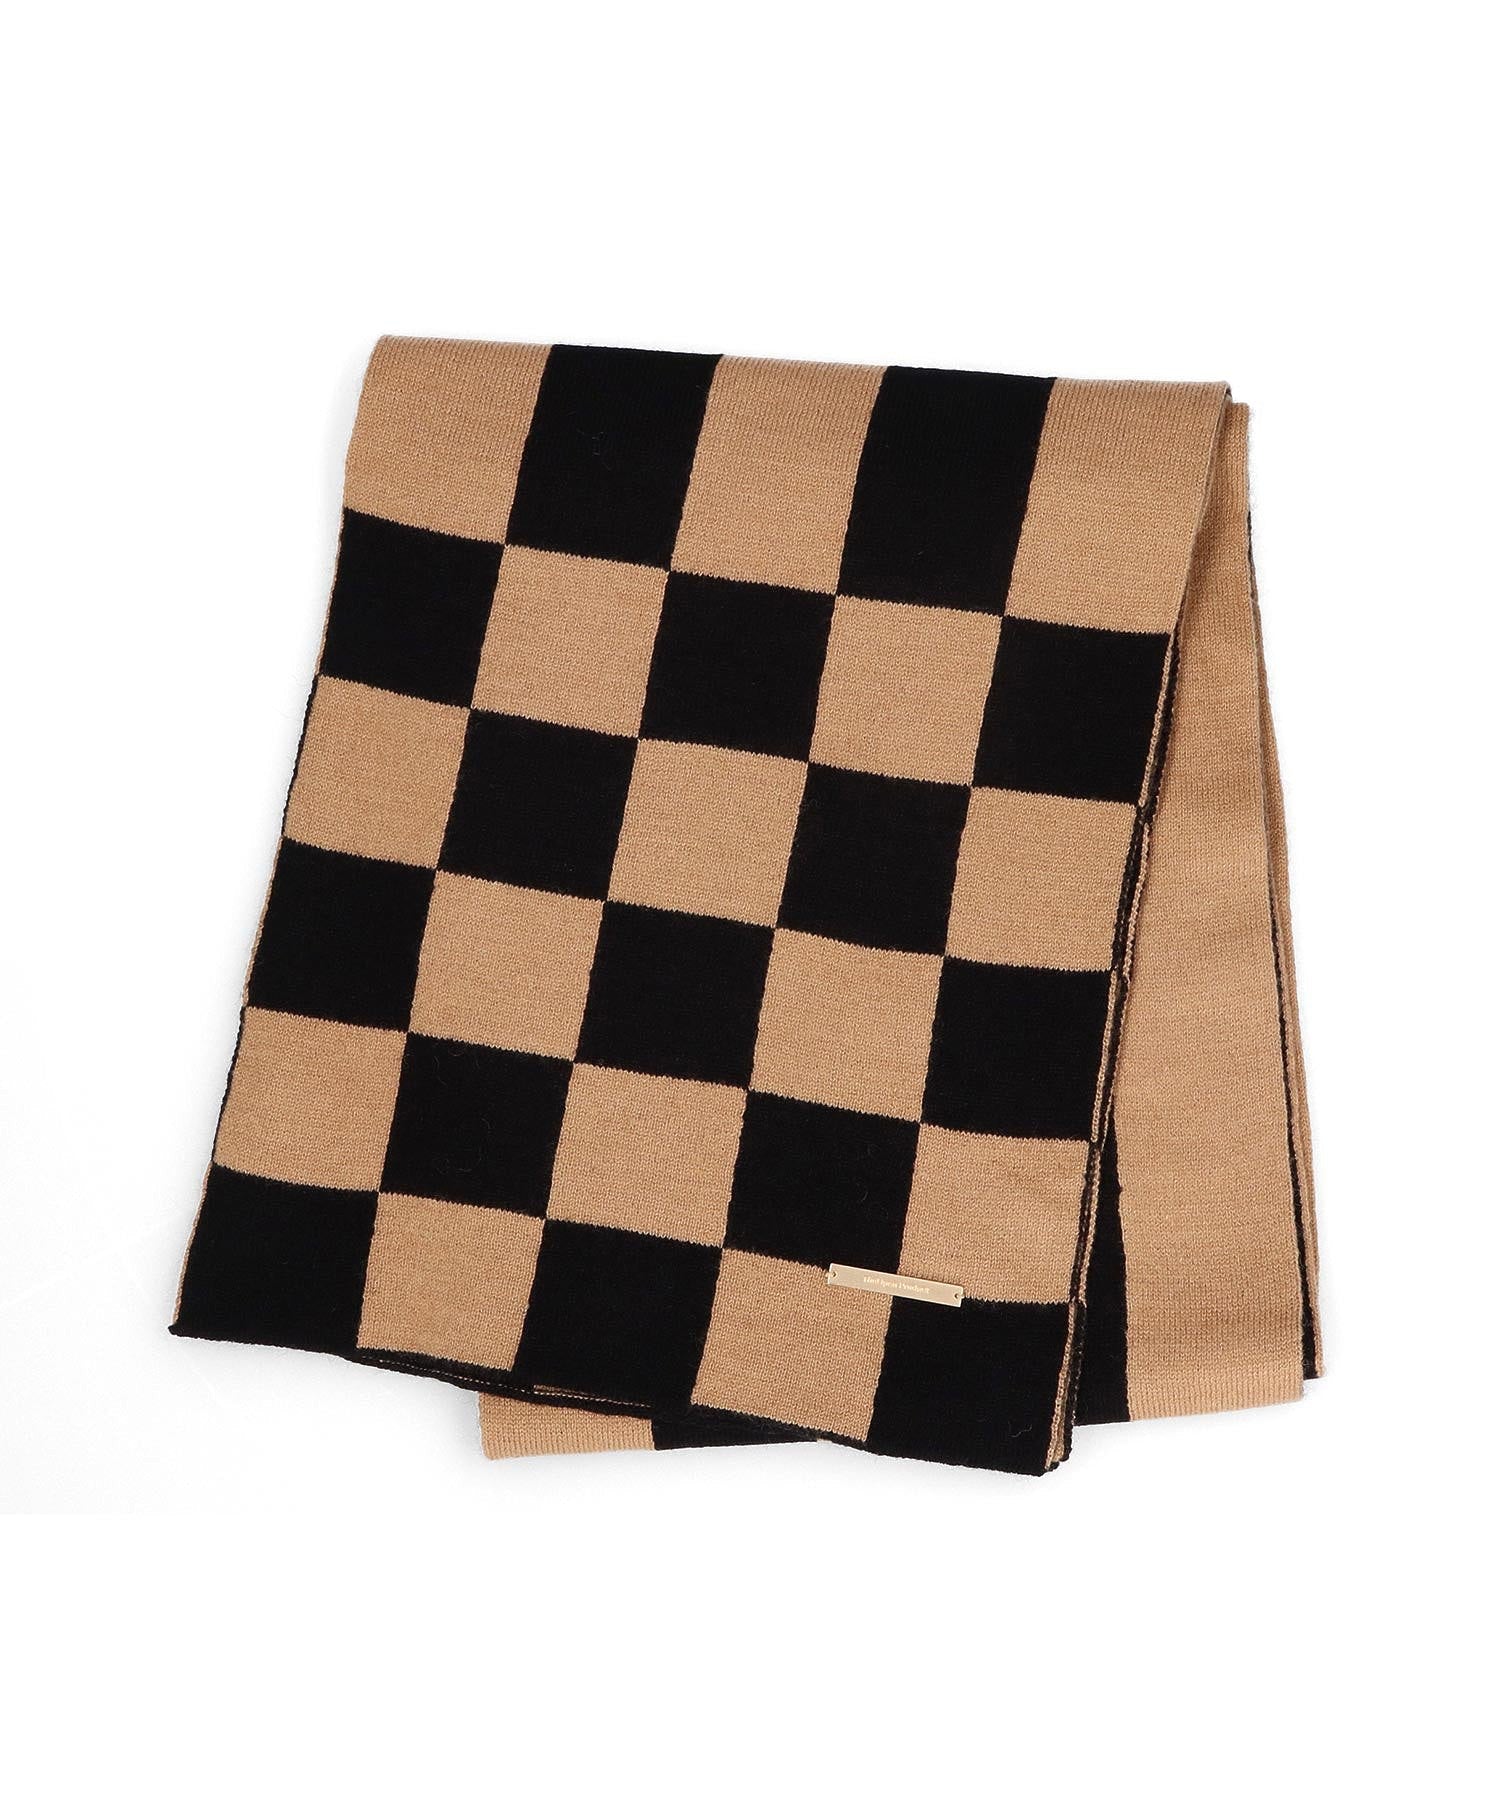 TheOpen Product /ザオープンプロダクト CHESSBOARD CHECK MUFFLER GTO214AC001